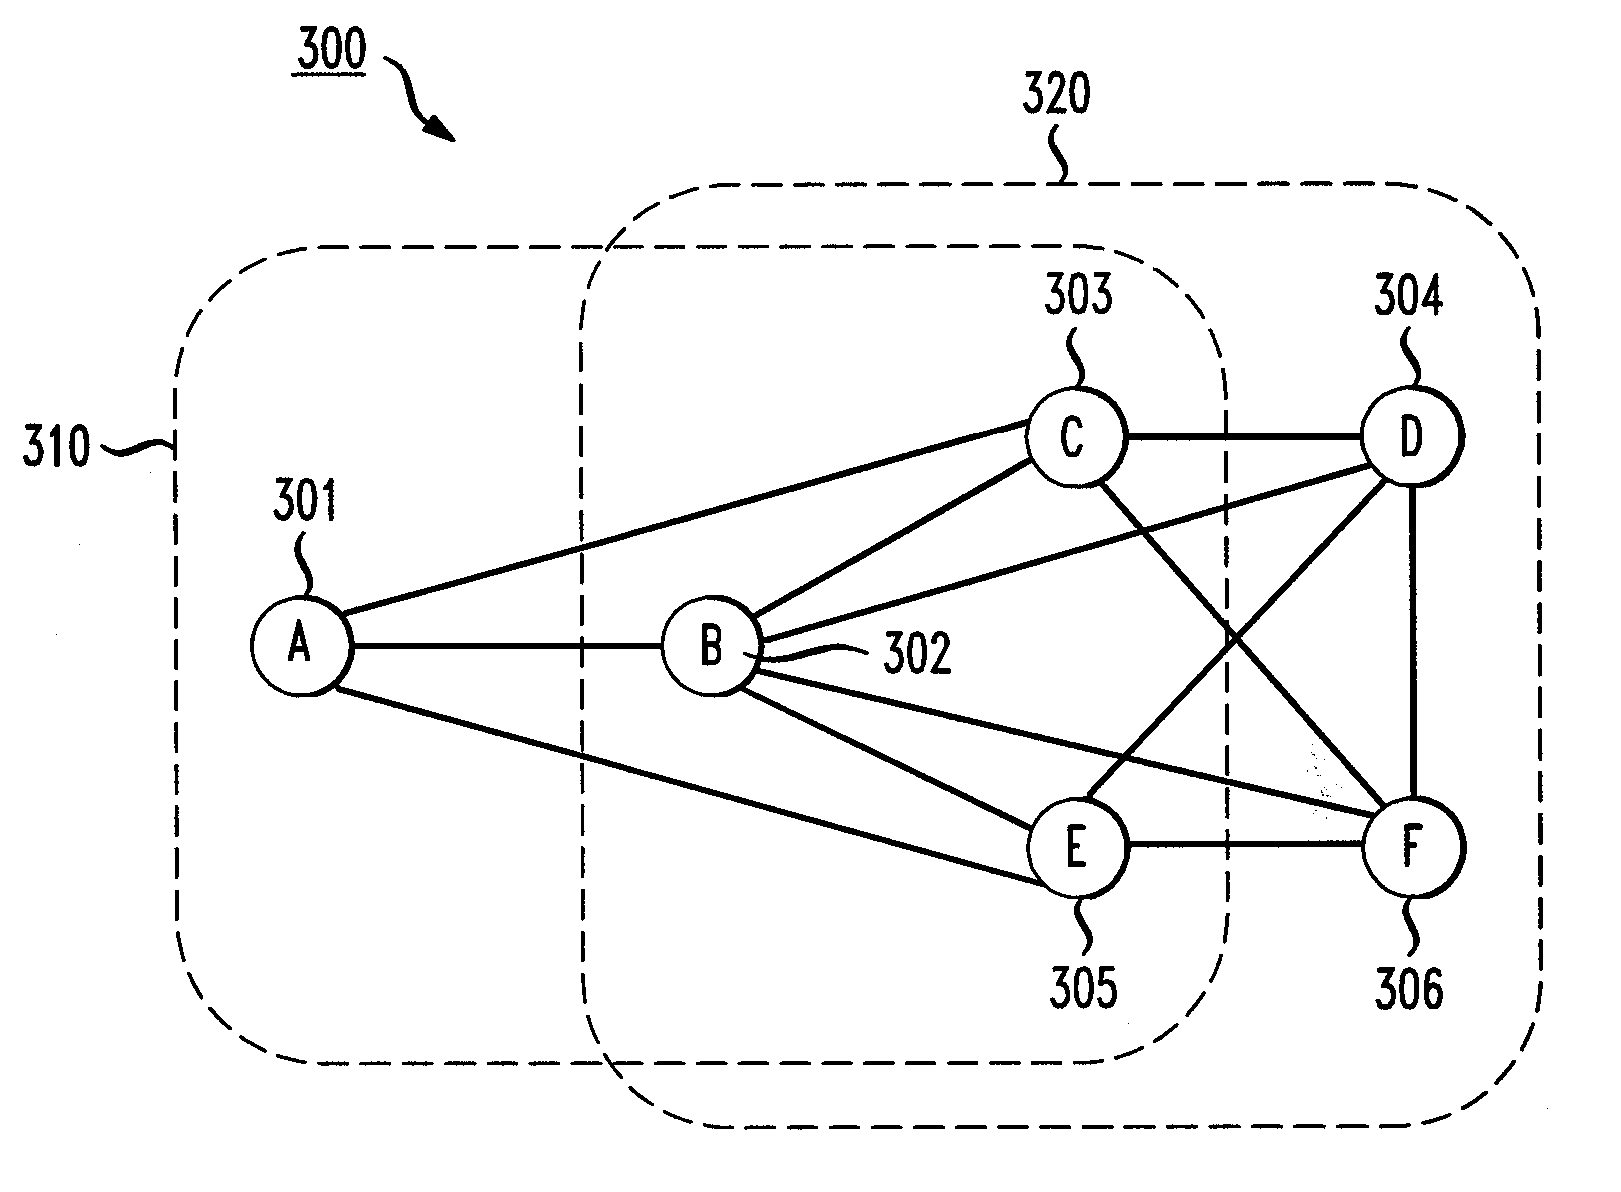 Method and Apparatus for Lifetime Maximization of Wireless Sensor Networks